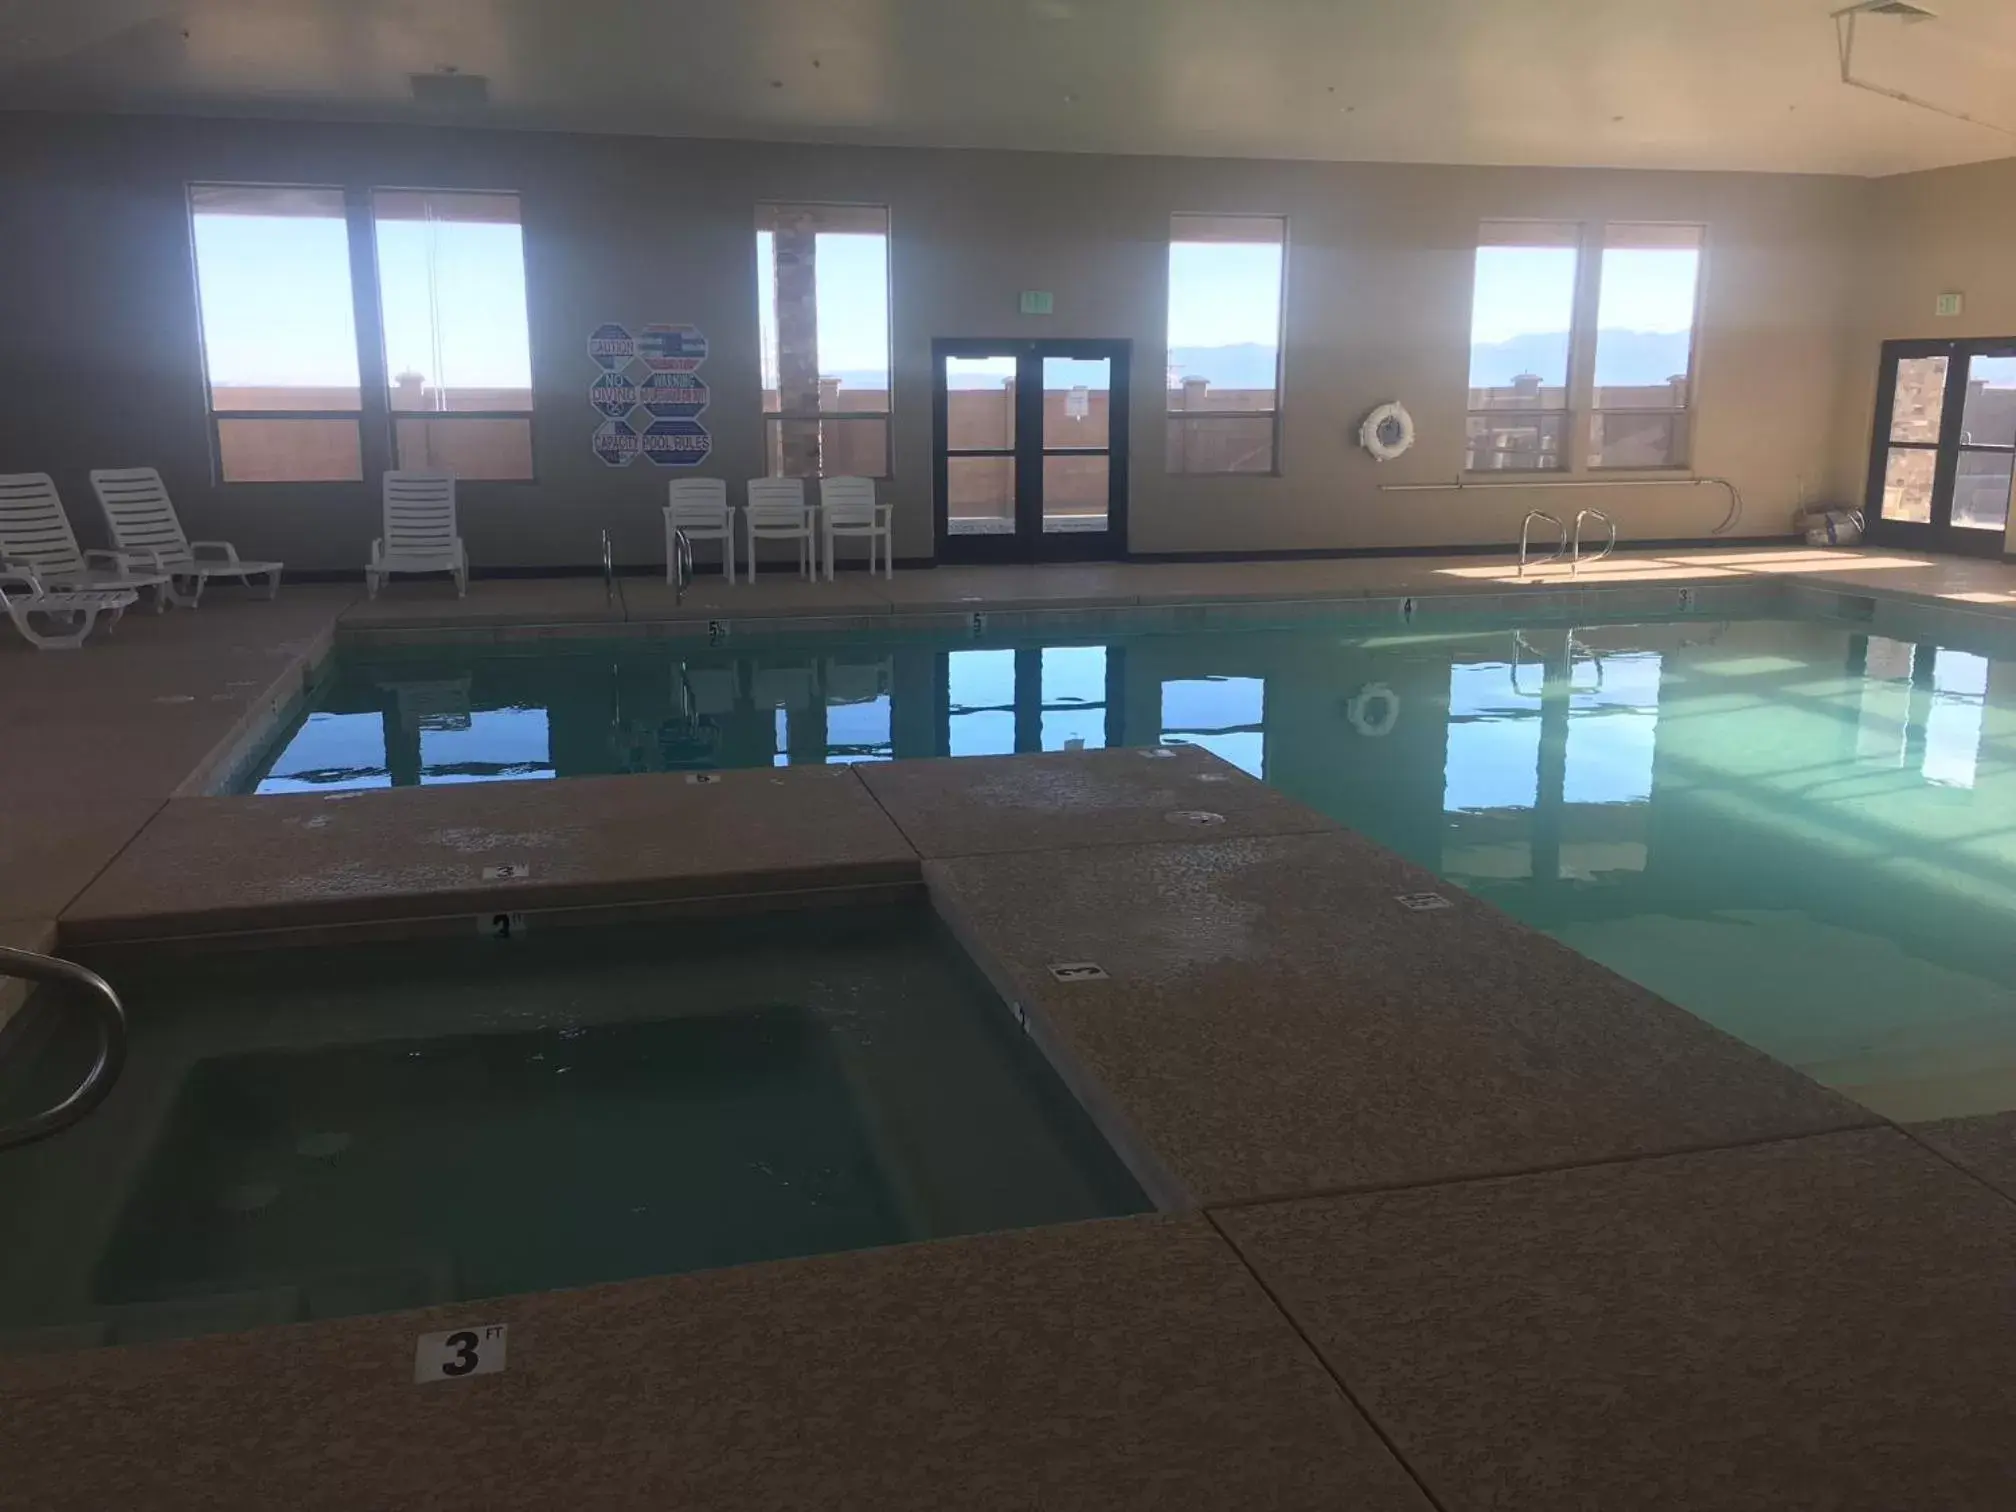 Swimming Pool in Canyon Country Lodge